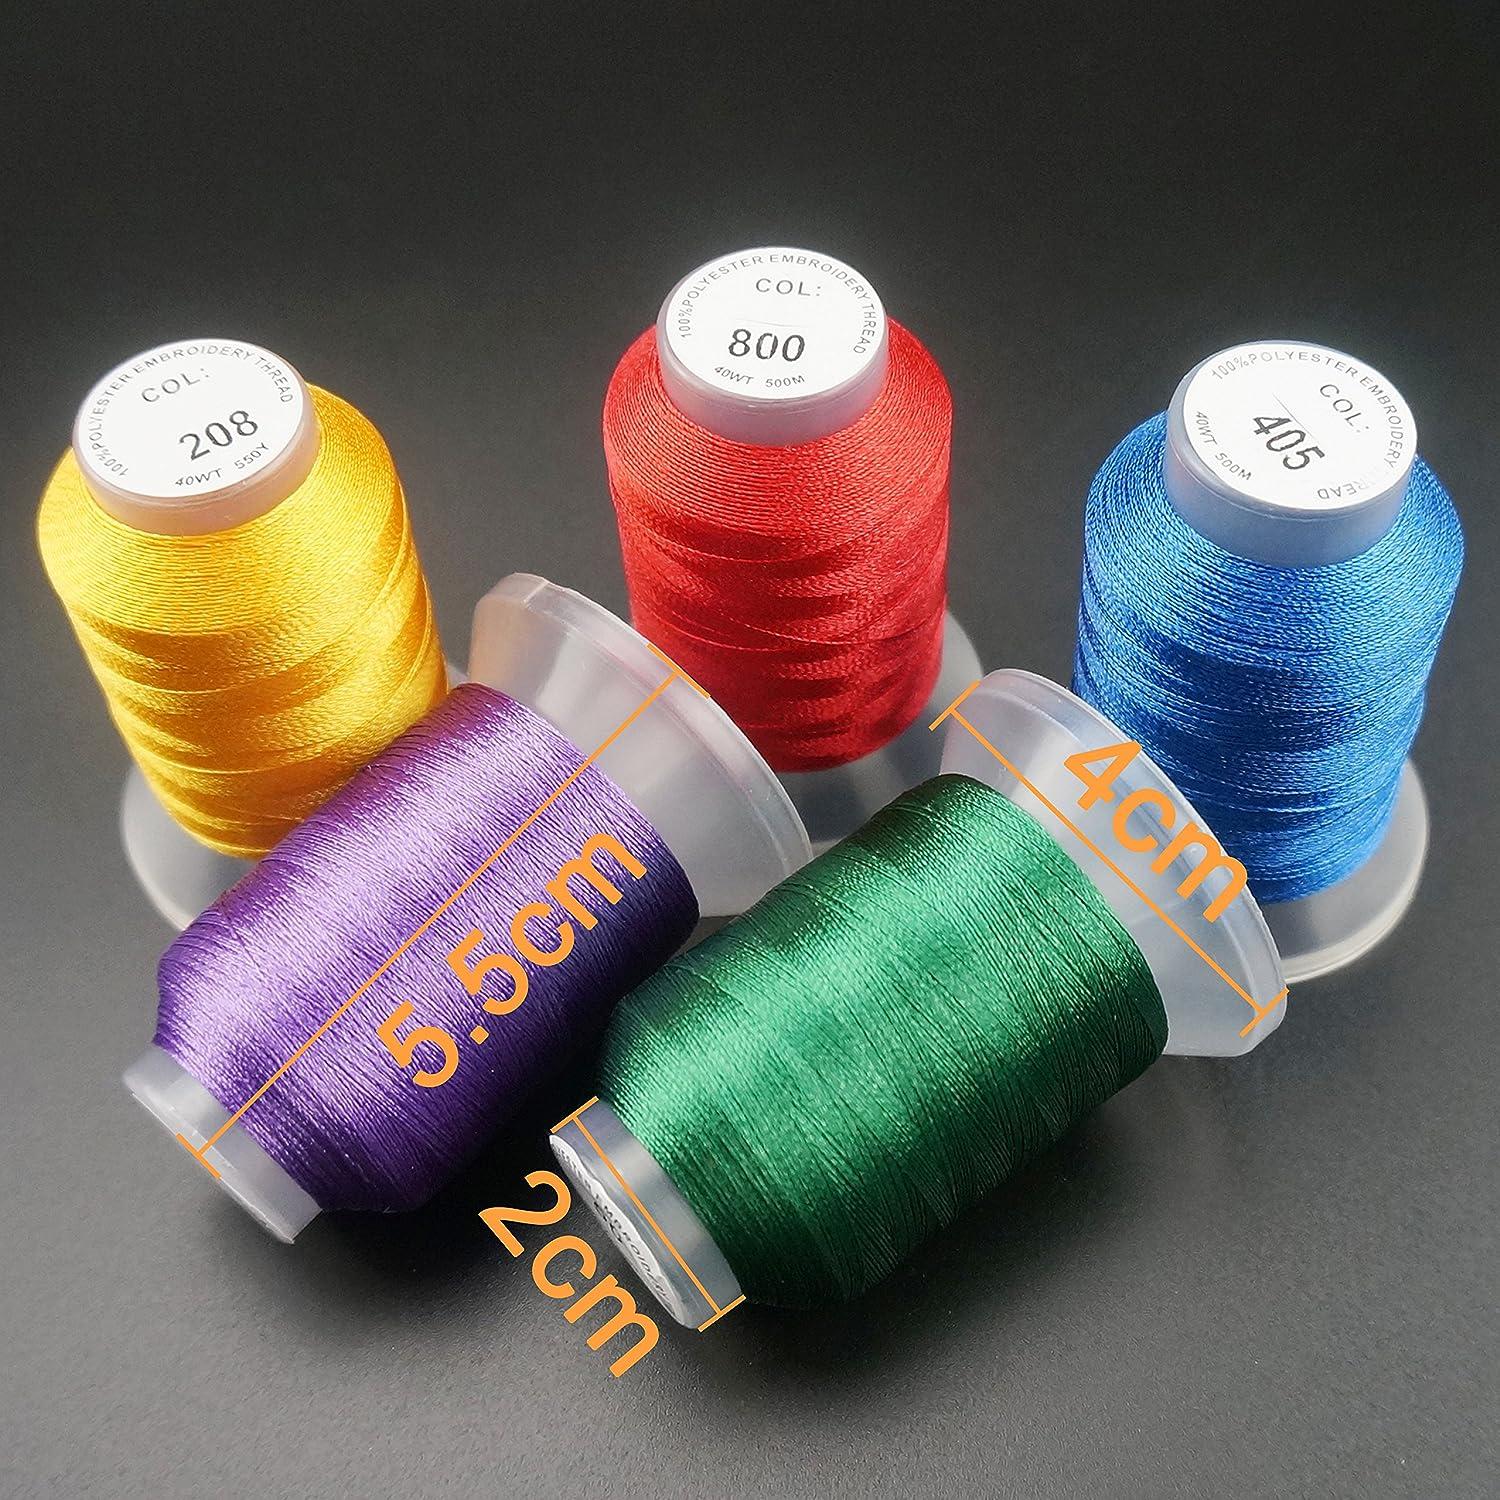 New brothreads 40 Brother Colors Polyester Machine Embroidery Thread Kit 500M Each for Home-Based Embroidery and Sewing Machine